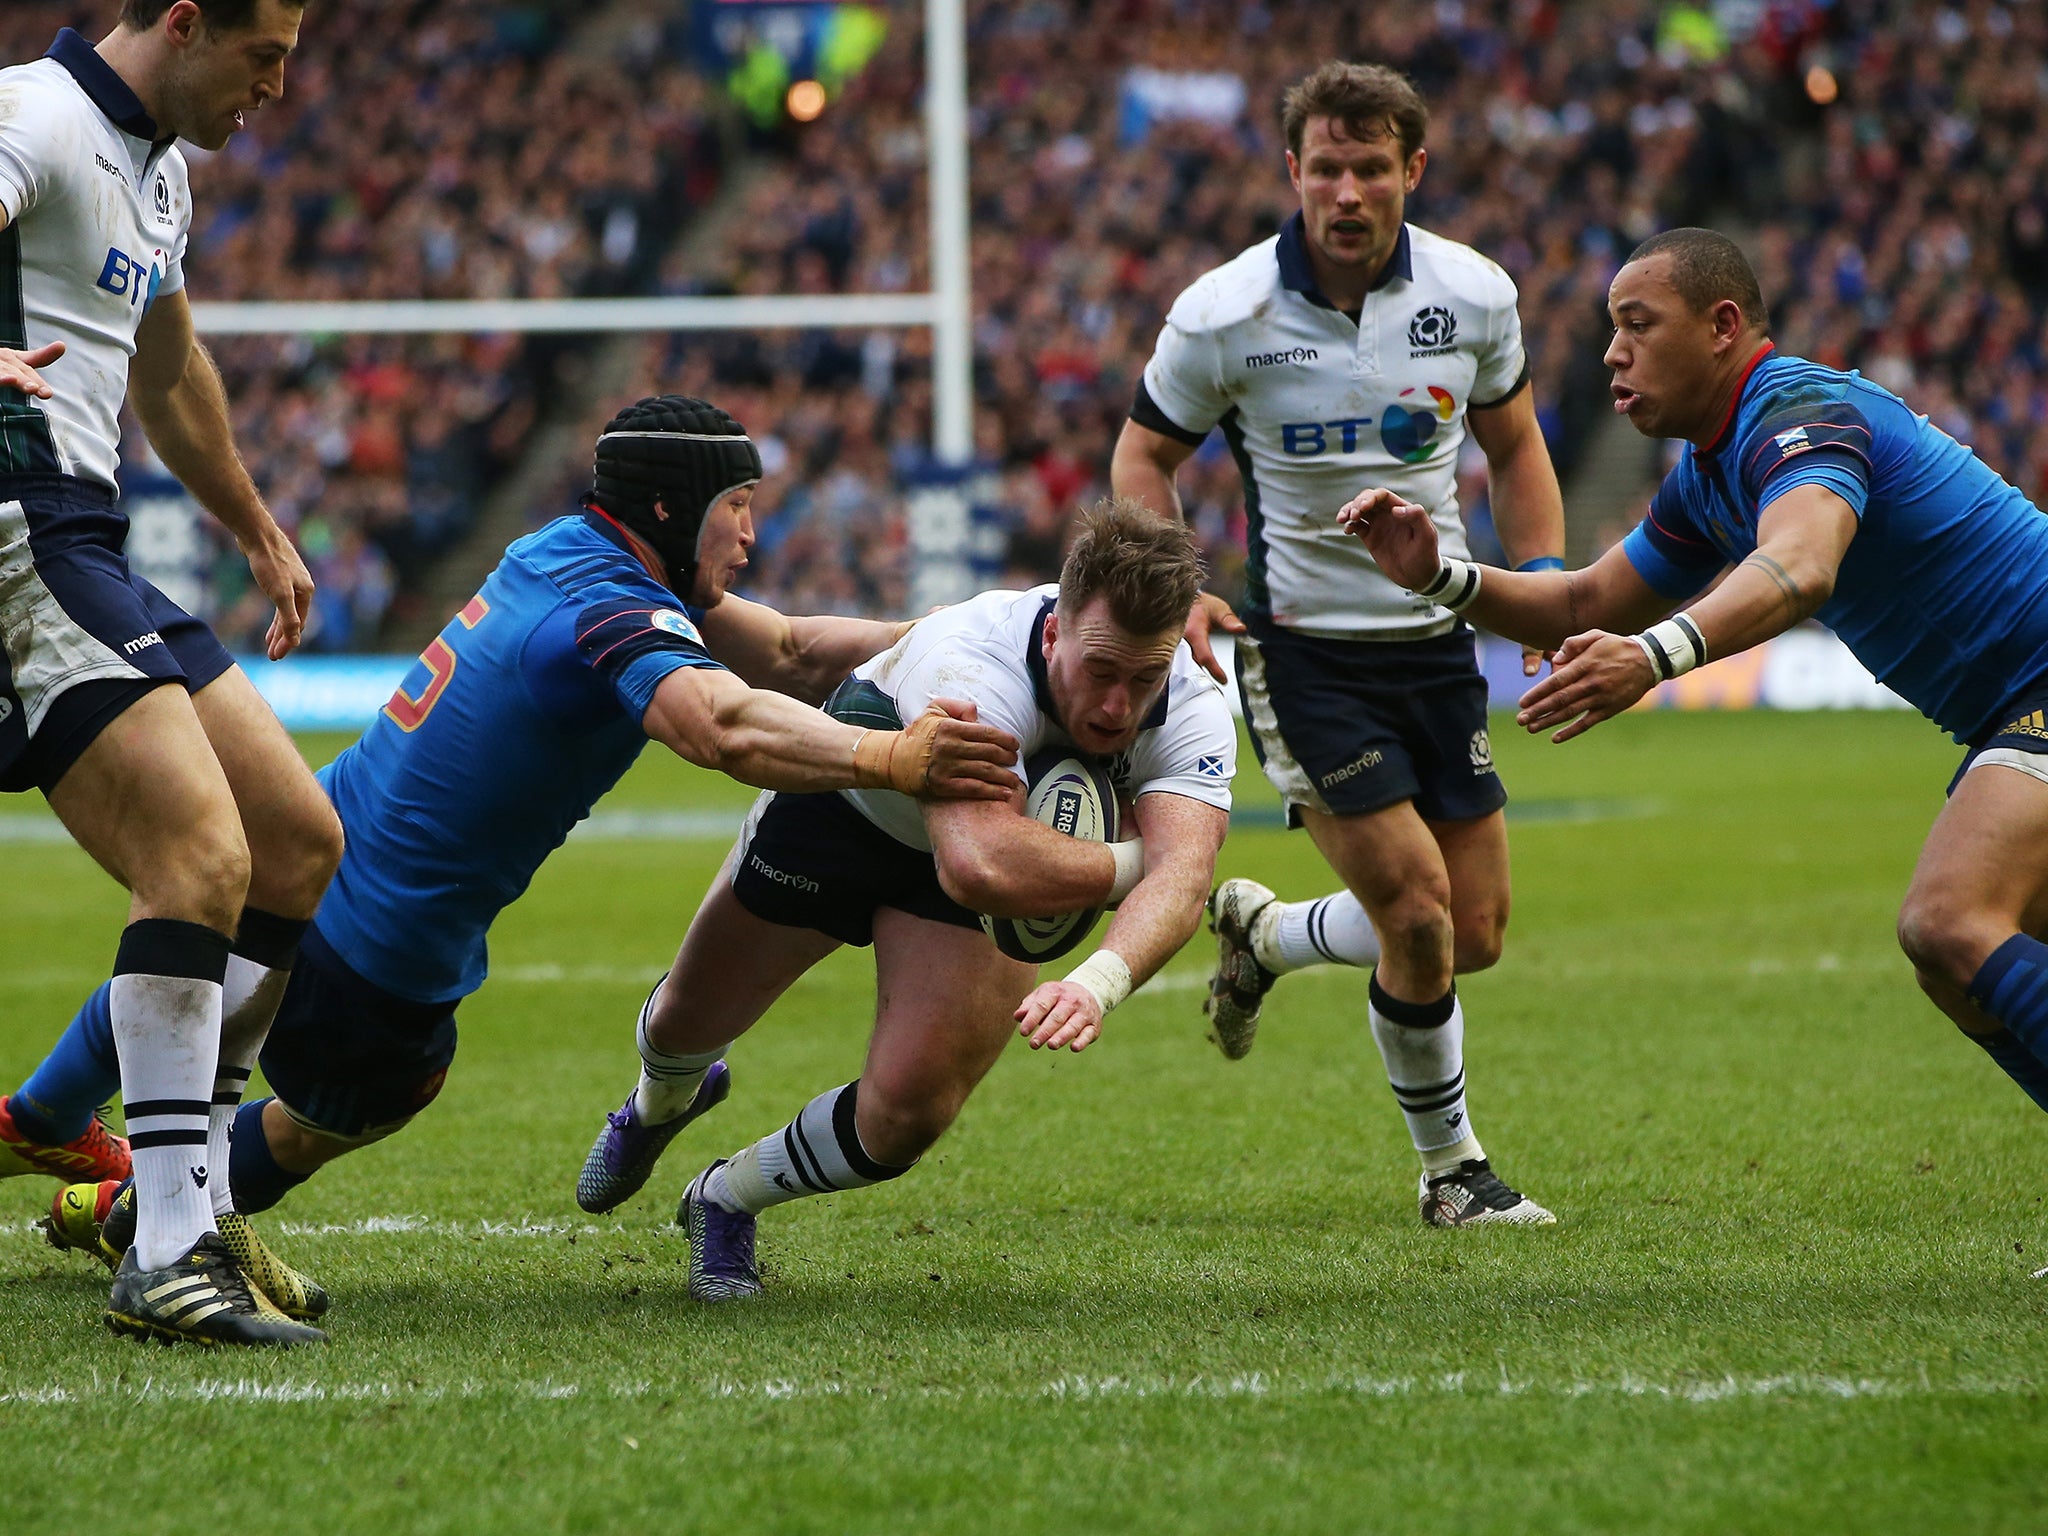 Stuart Hogg scores a try for Scotland against France in the Murrayfield win